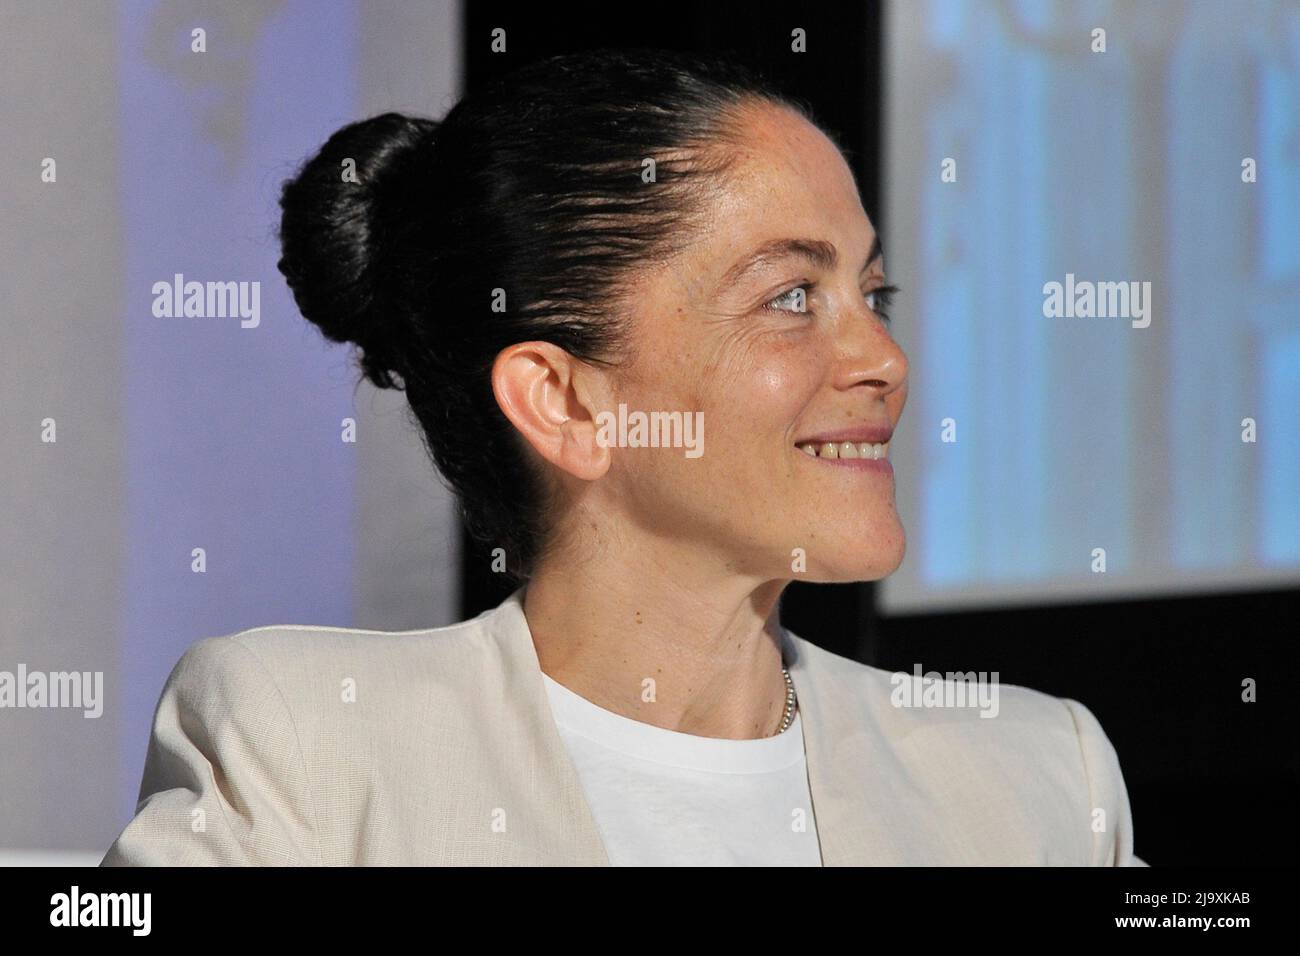 Napoli, Italy. 25th May, 2022. Rosanna Marziale chef, during the celebrations of the 130th anniversary of the newspaper 'Il Mattino', which were held at the court theater of the Royal Palace in Naples. Napoli, Italy, 25 May 2022. (photo by Vincenzo Izzo/Sipa USA) Credit: Sipa USA/Alamy Live News Stock Photo